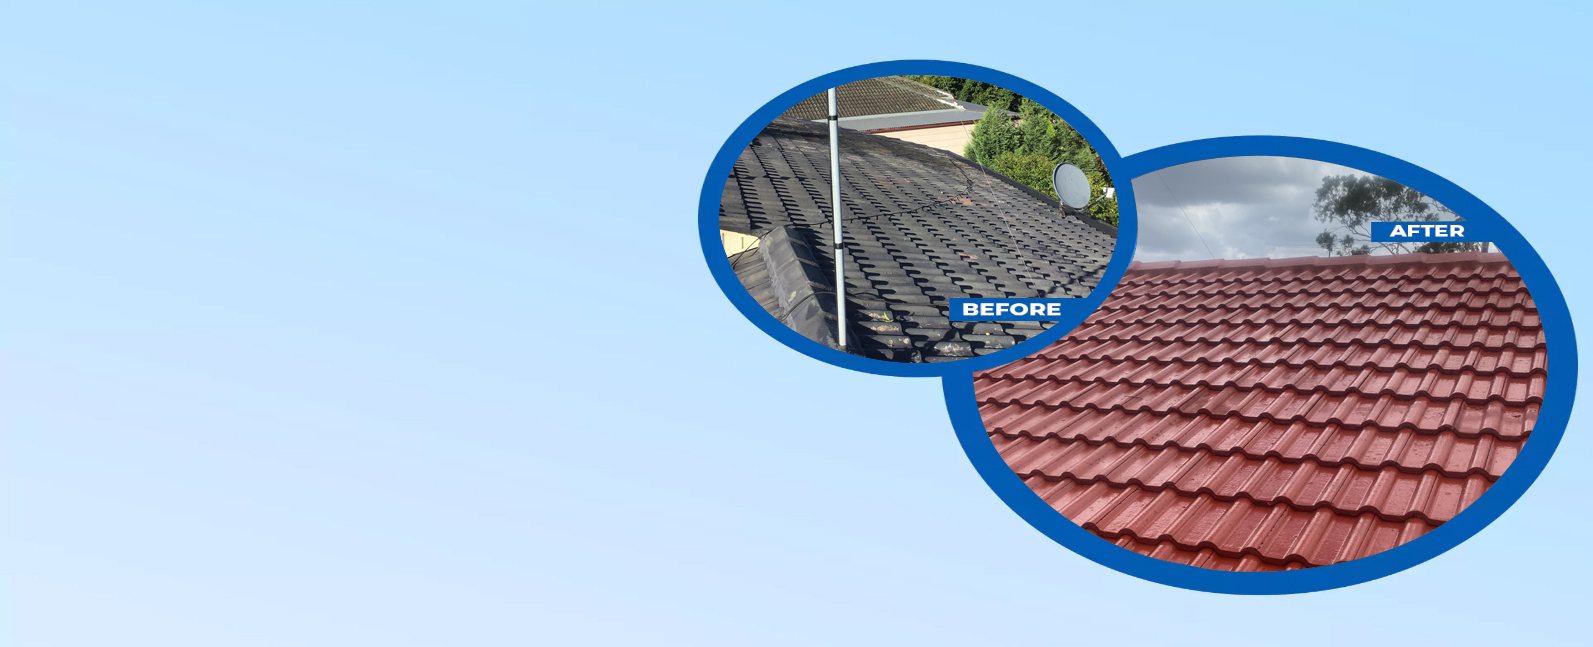 Aspects That Define the Metal Roof Cleaning and Painting Service